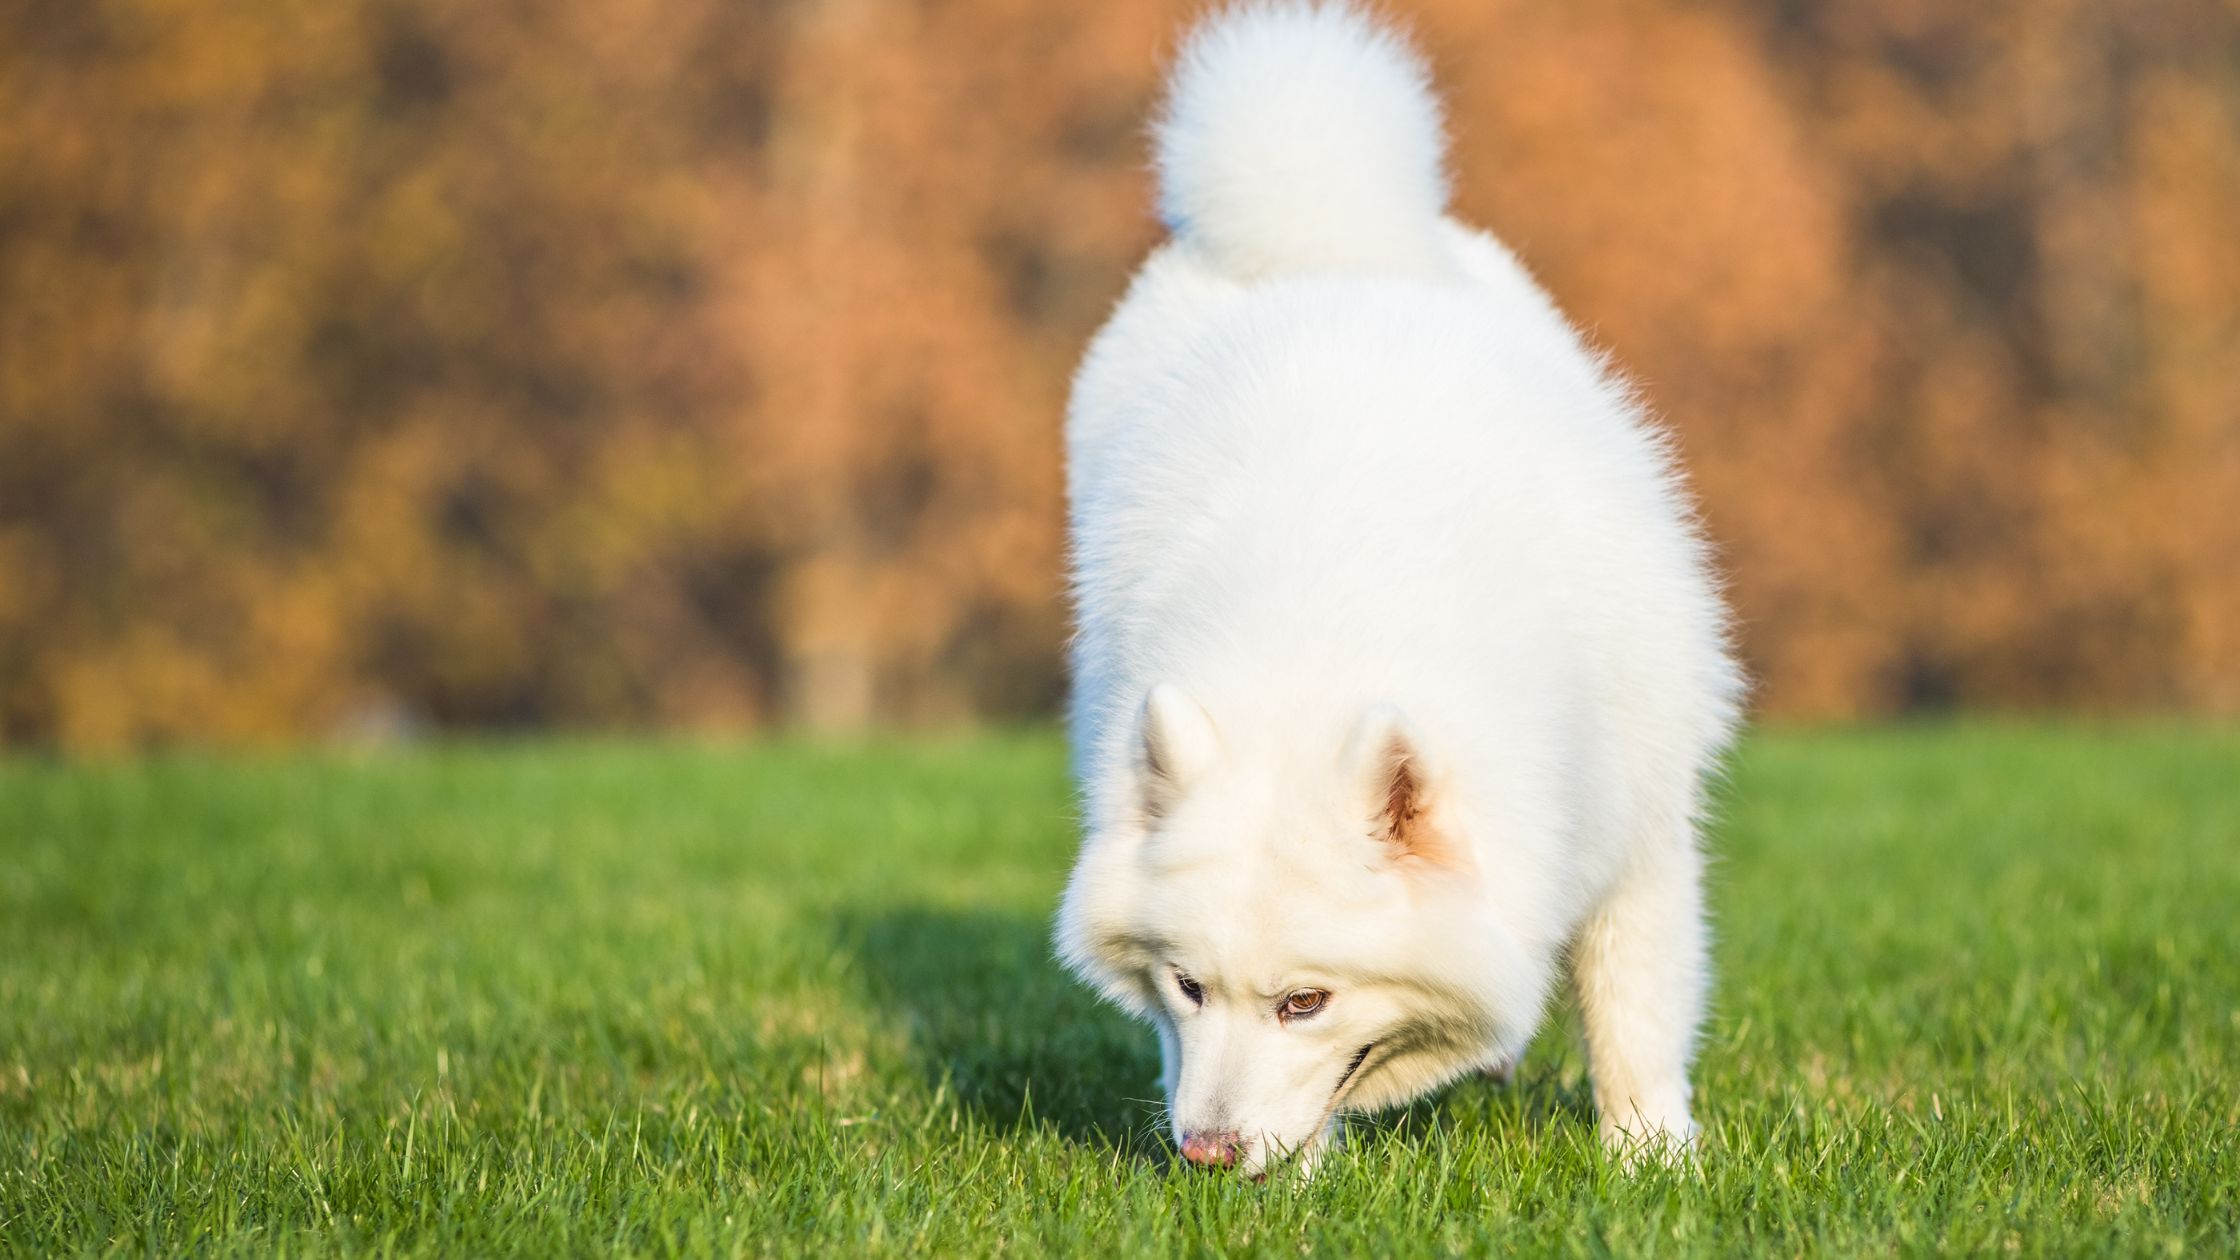 WHY DOGS EAT GRASS